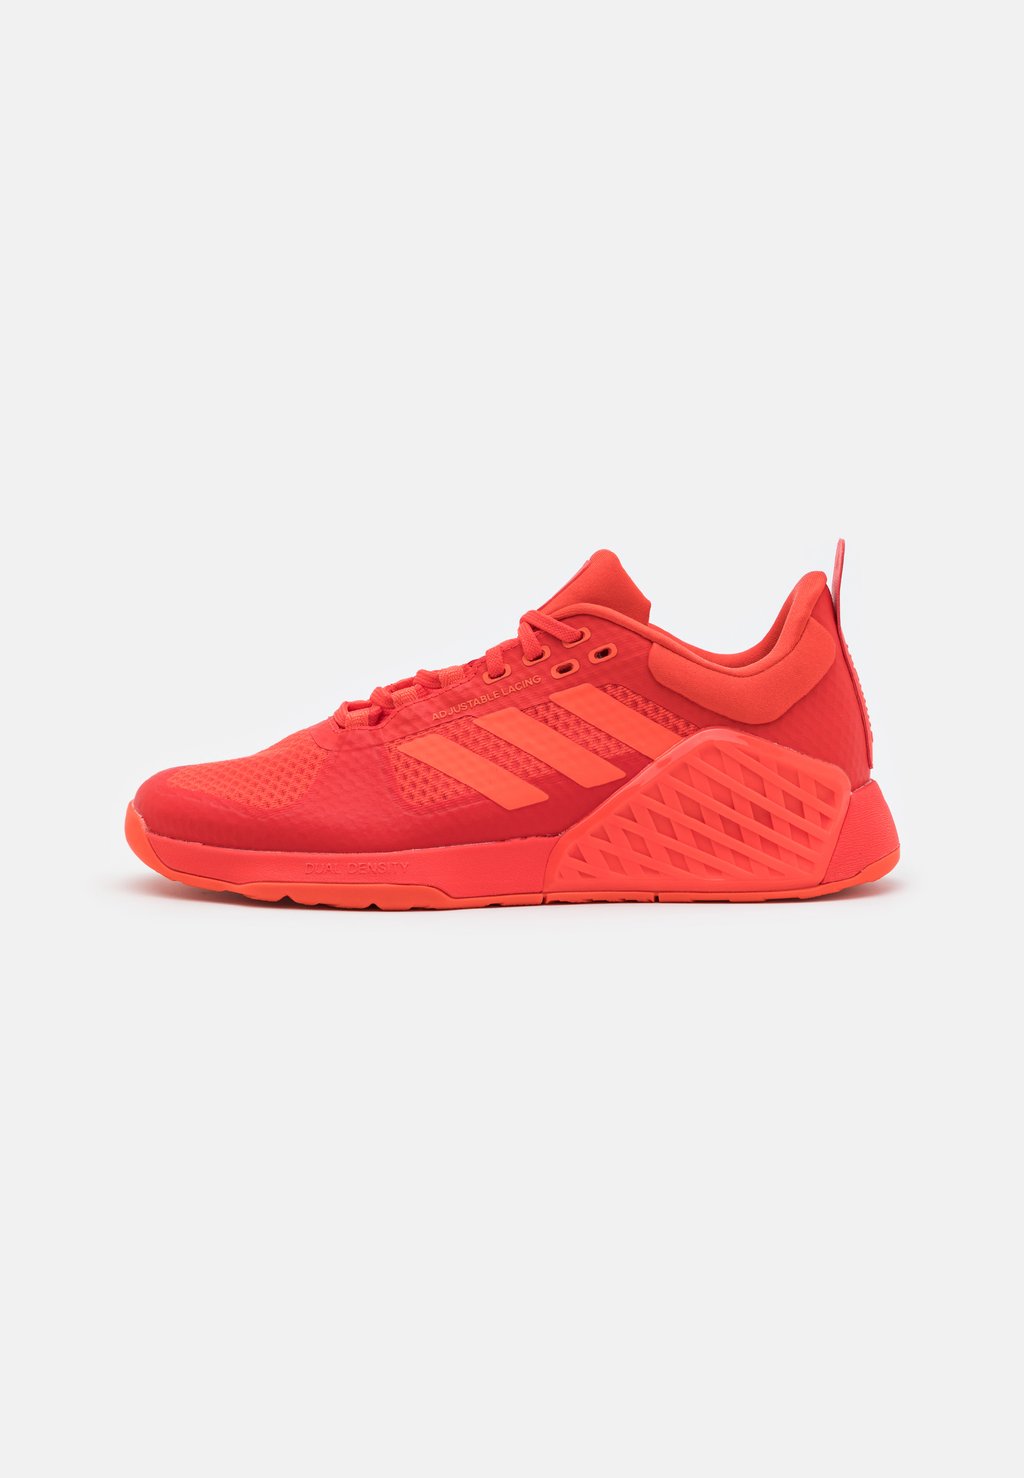 red shadow Кроссовки DROPSET 2 TRAINER adidas Performance, цвет bright red/solar red/shadow red